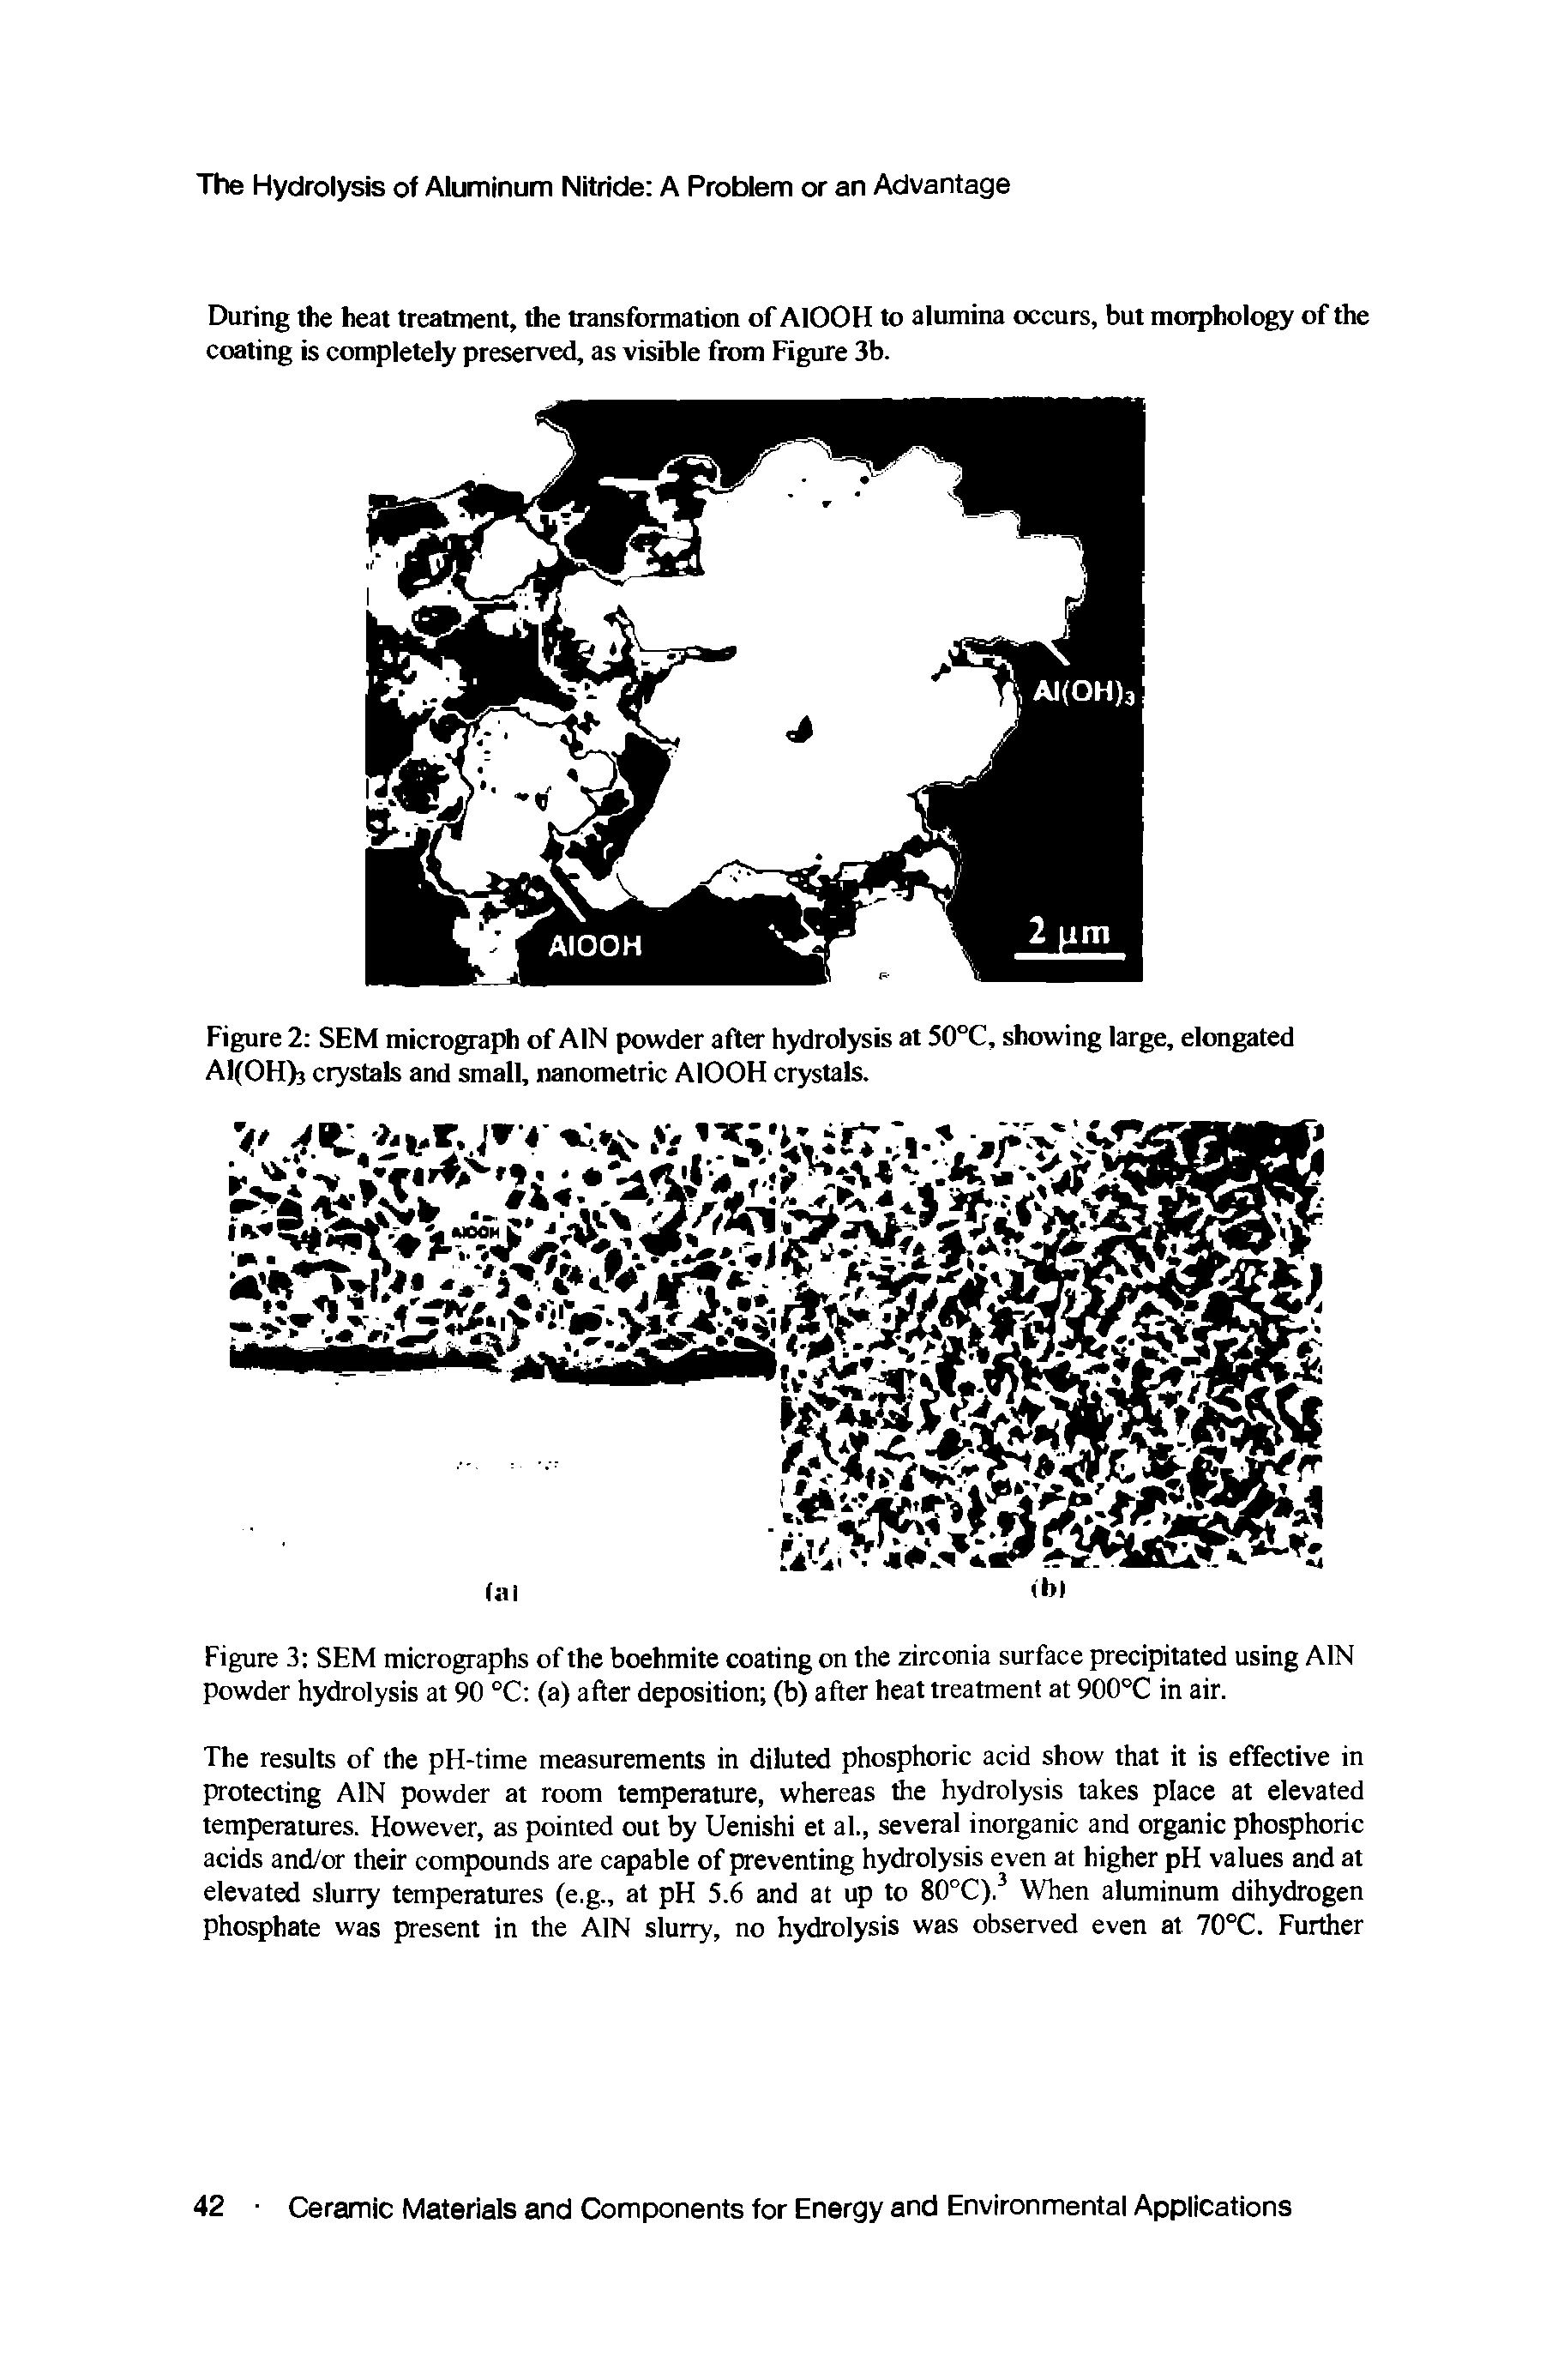 Figure 3 SEM micrographs of the boehmite coating on the zirconia surface precipitated using AIN powder hydrolysis at 90 °C (a) after deposition (b) after heat treatment at 900°C in air.